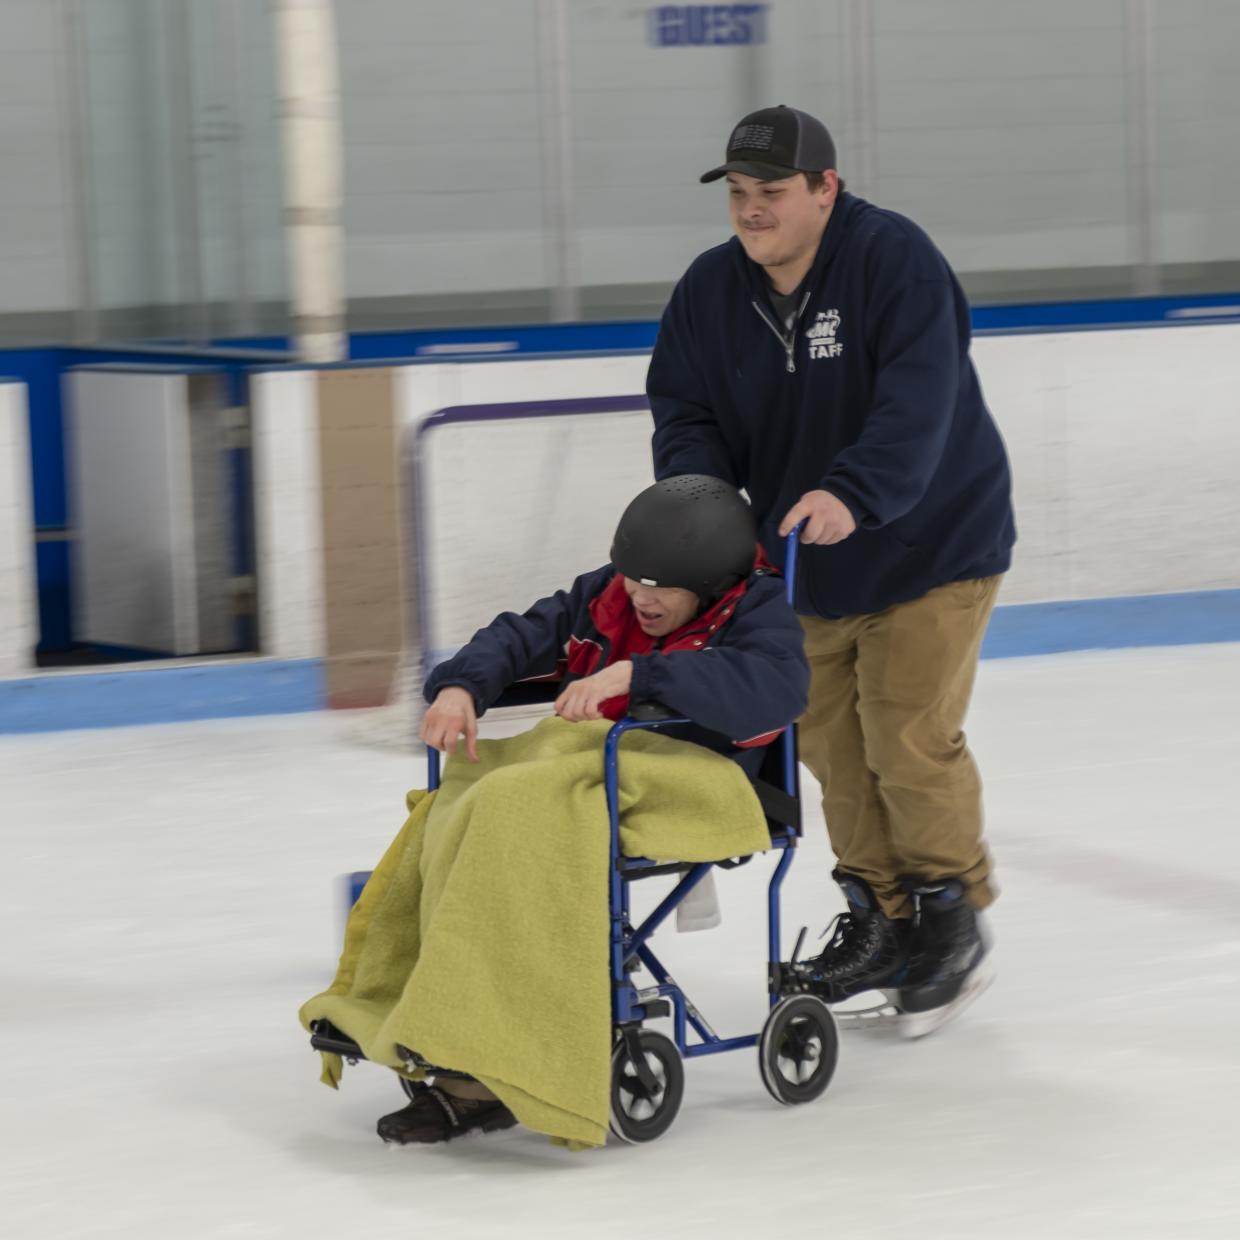 A person on skates pushes a person in wheelchair on ice at an ice skating rink.